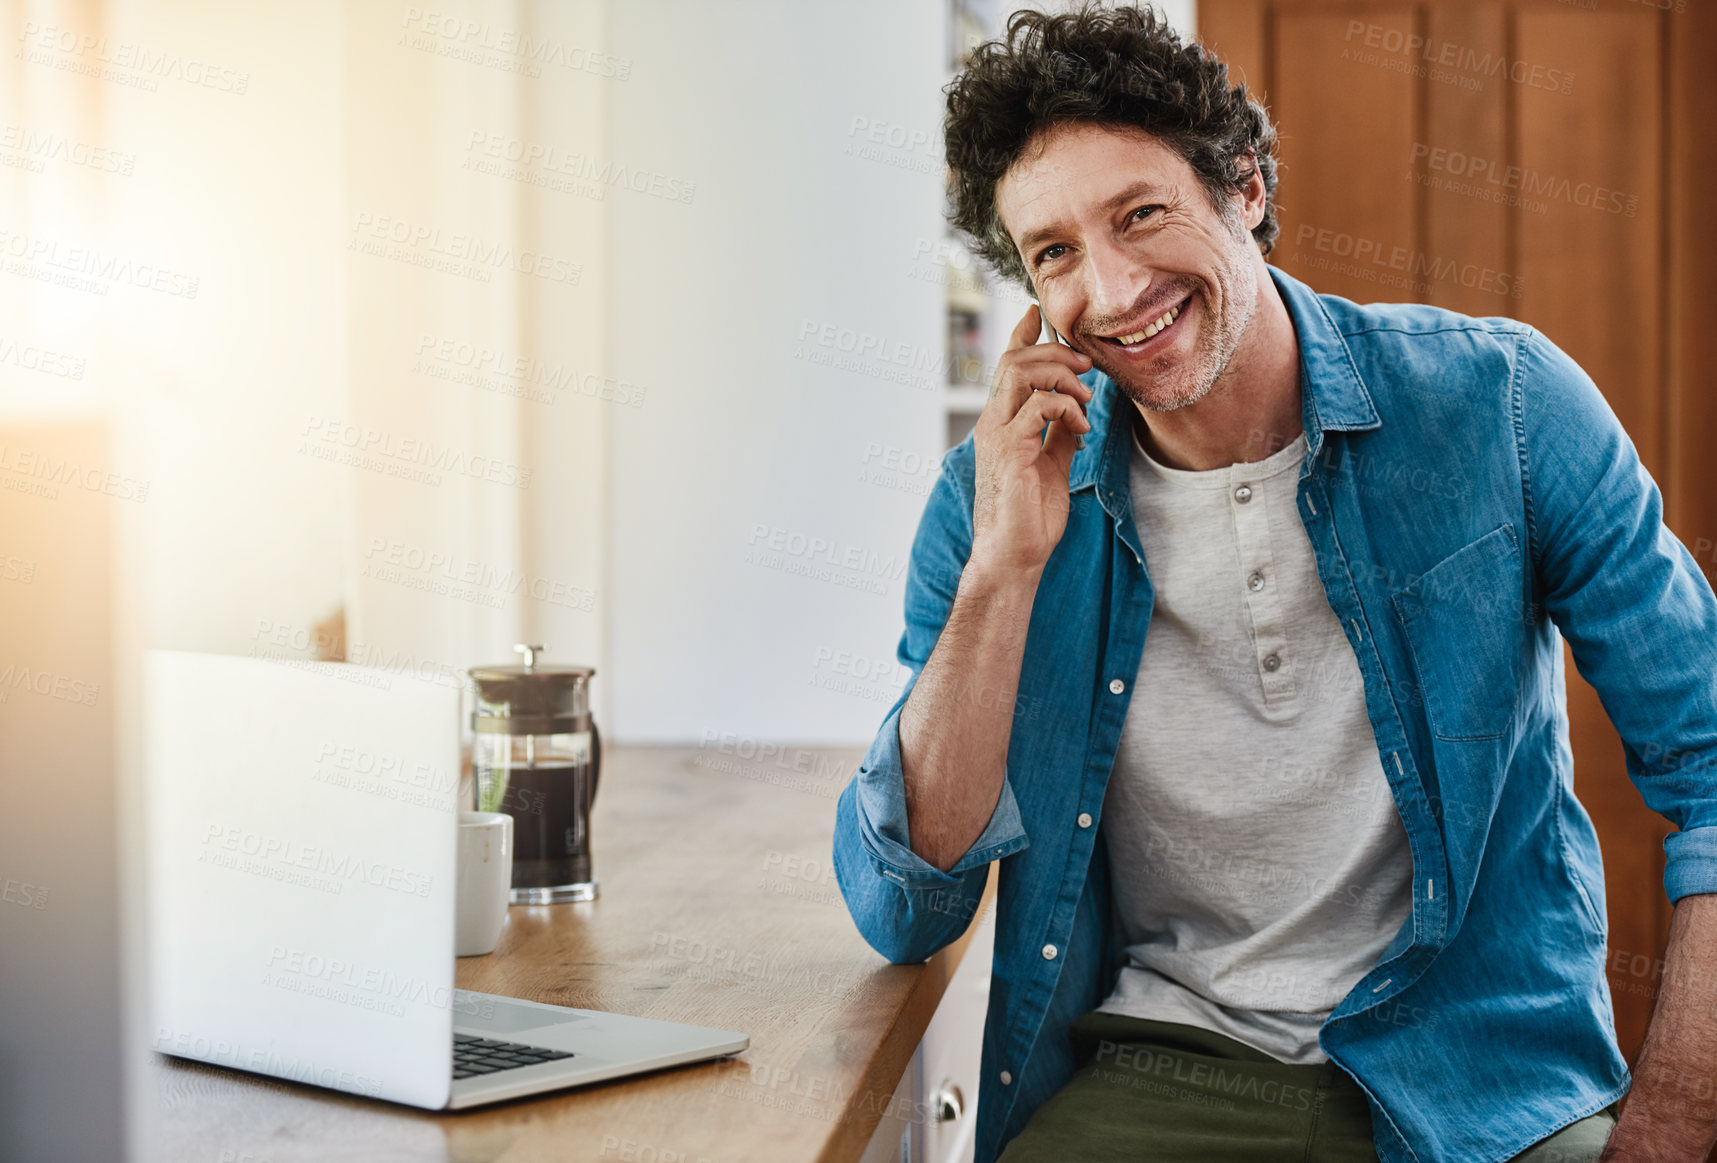 Buy stock photo Portrait of a man speaking on his cellphone while using his laptop in the kitchen